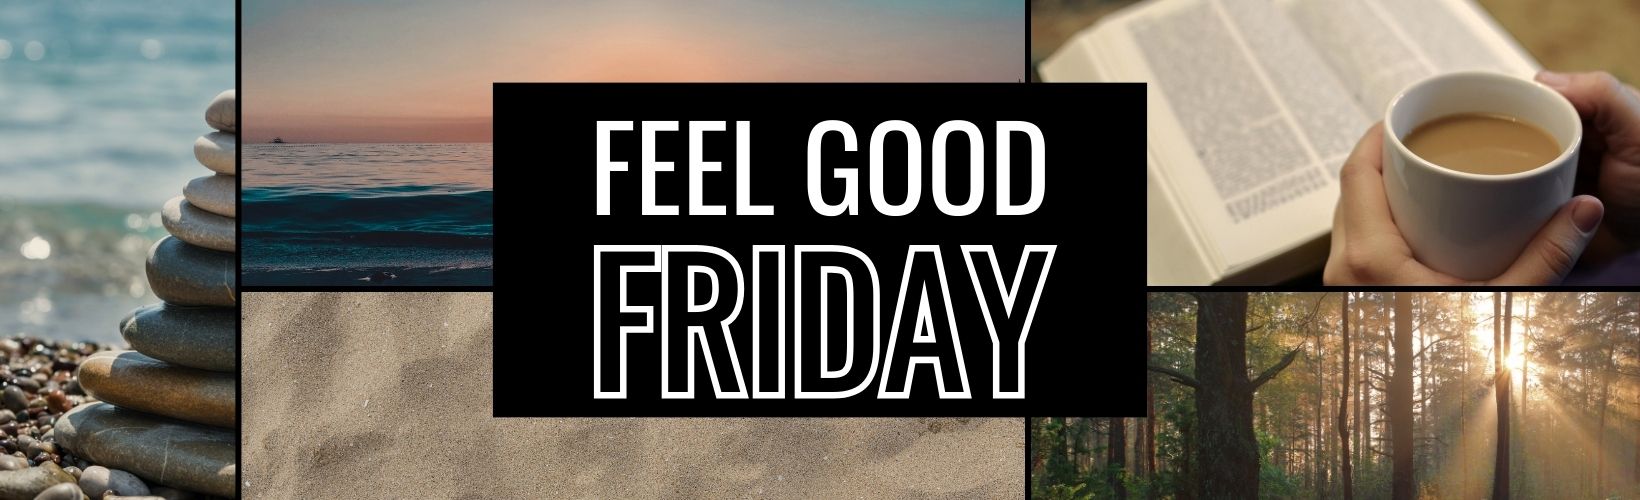 Feel Good Friday: The Power of Positive Thinking